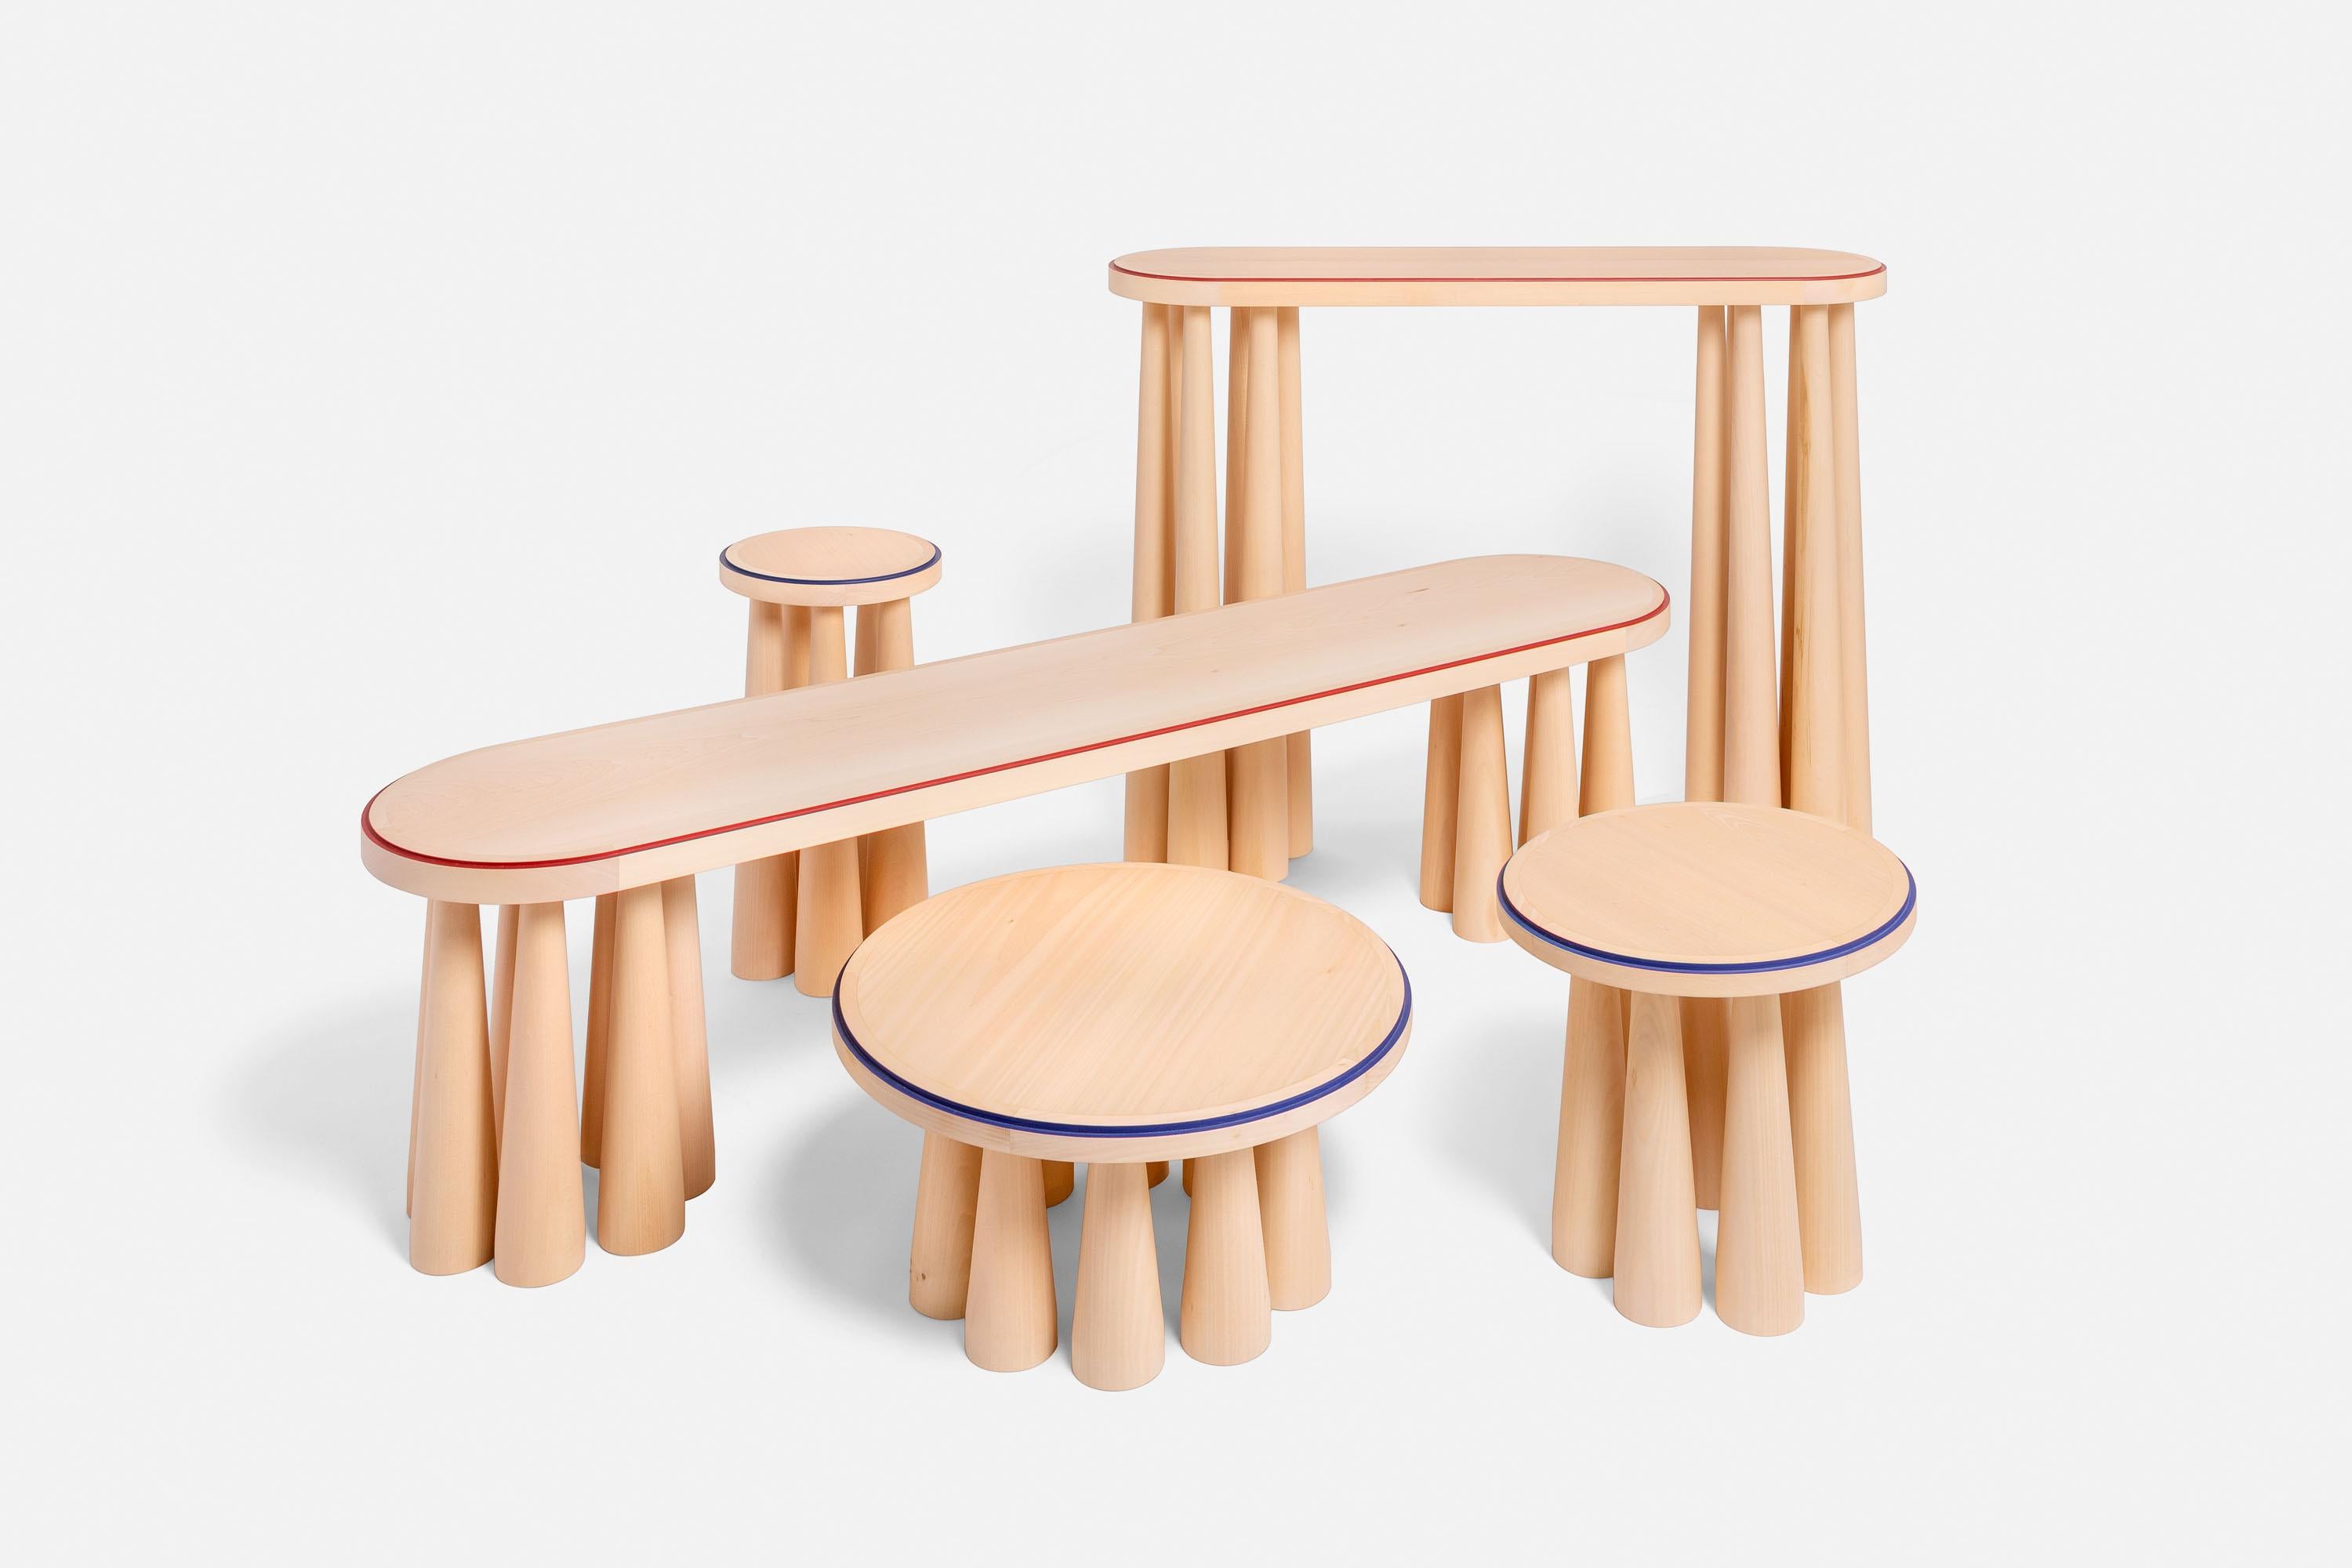 Bogdan medium coffee table by Studio Intervallo
Dimensions: D 45 x H 40 cm
Materials: LINDEN solid wood, with colored decoration on the circumference.

Other types of wood available on request.

The Bogdan collection is born from a single